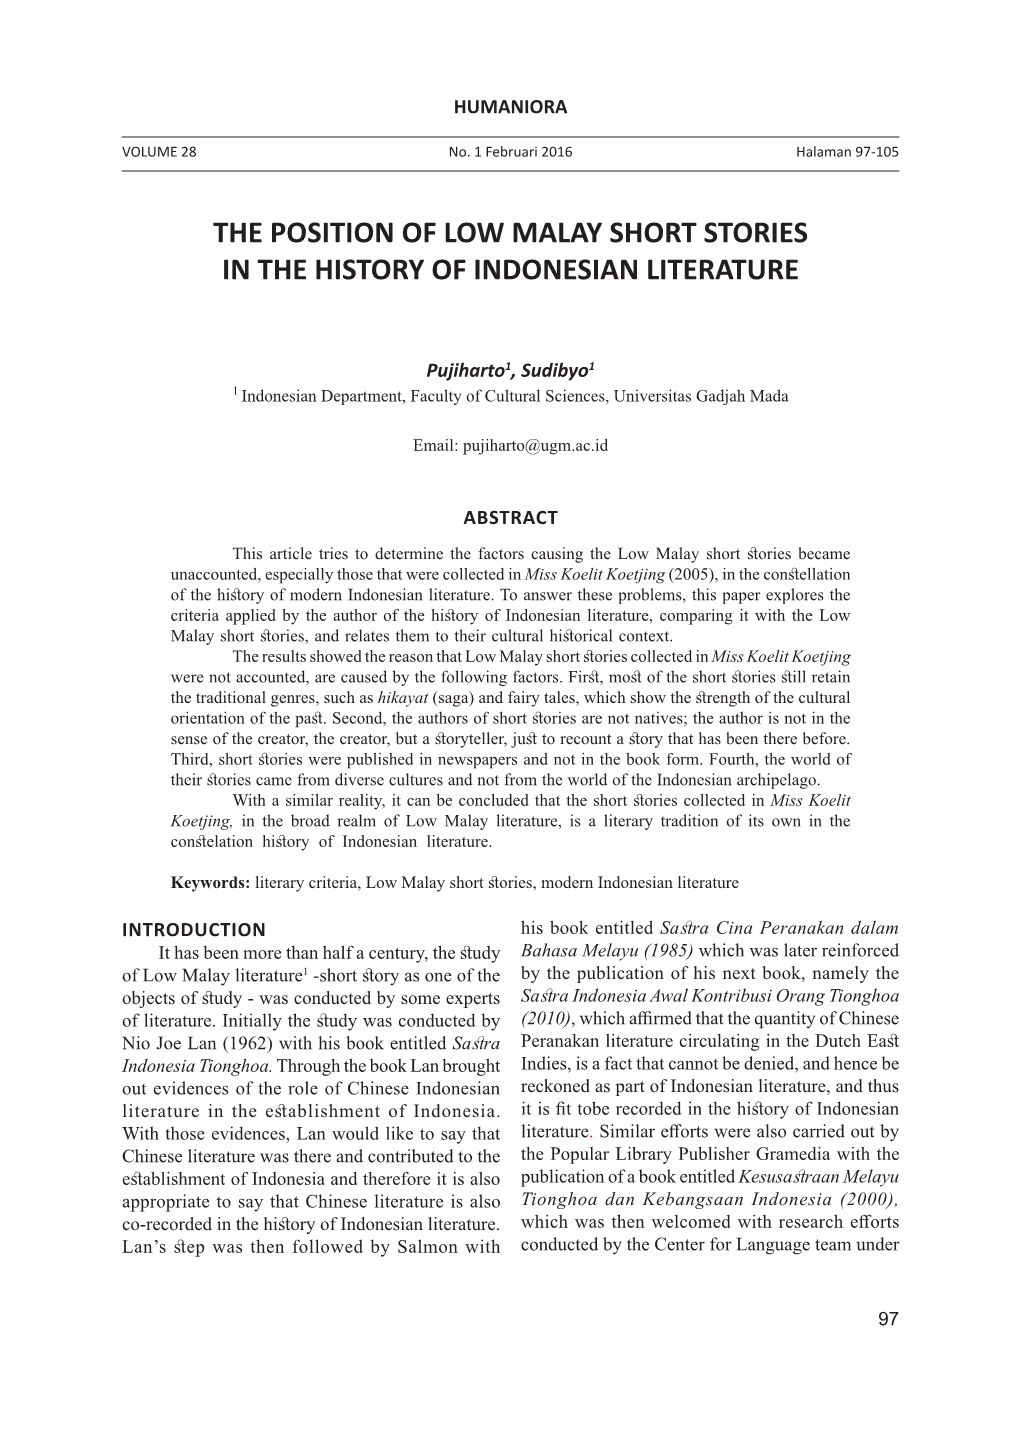 The Position of Low Malay Short Stories in the History of Indonesian Literature